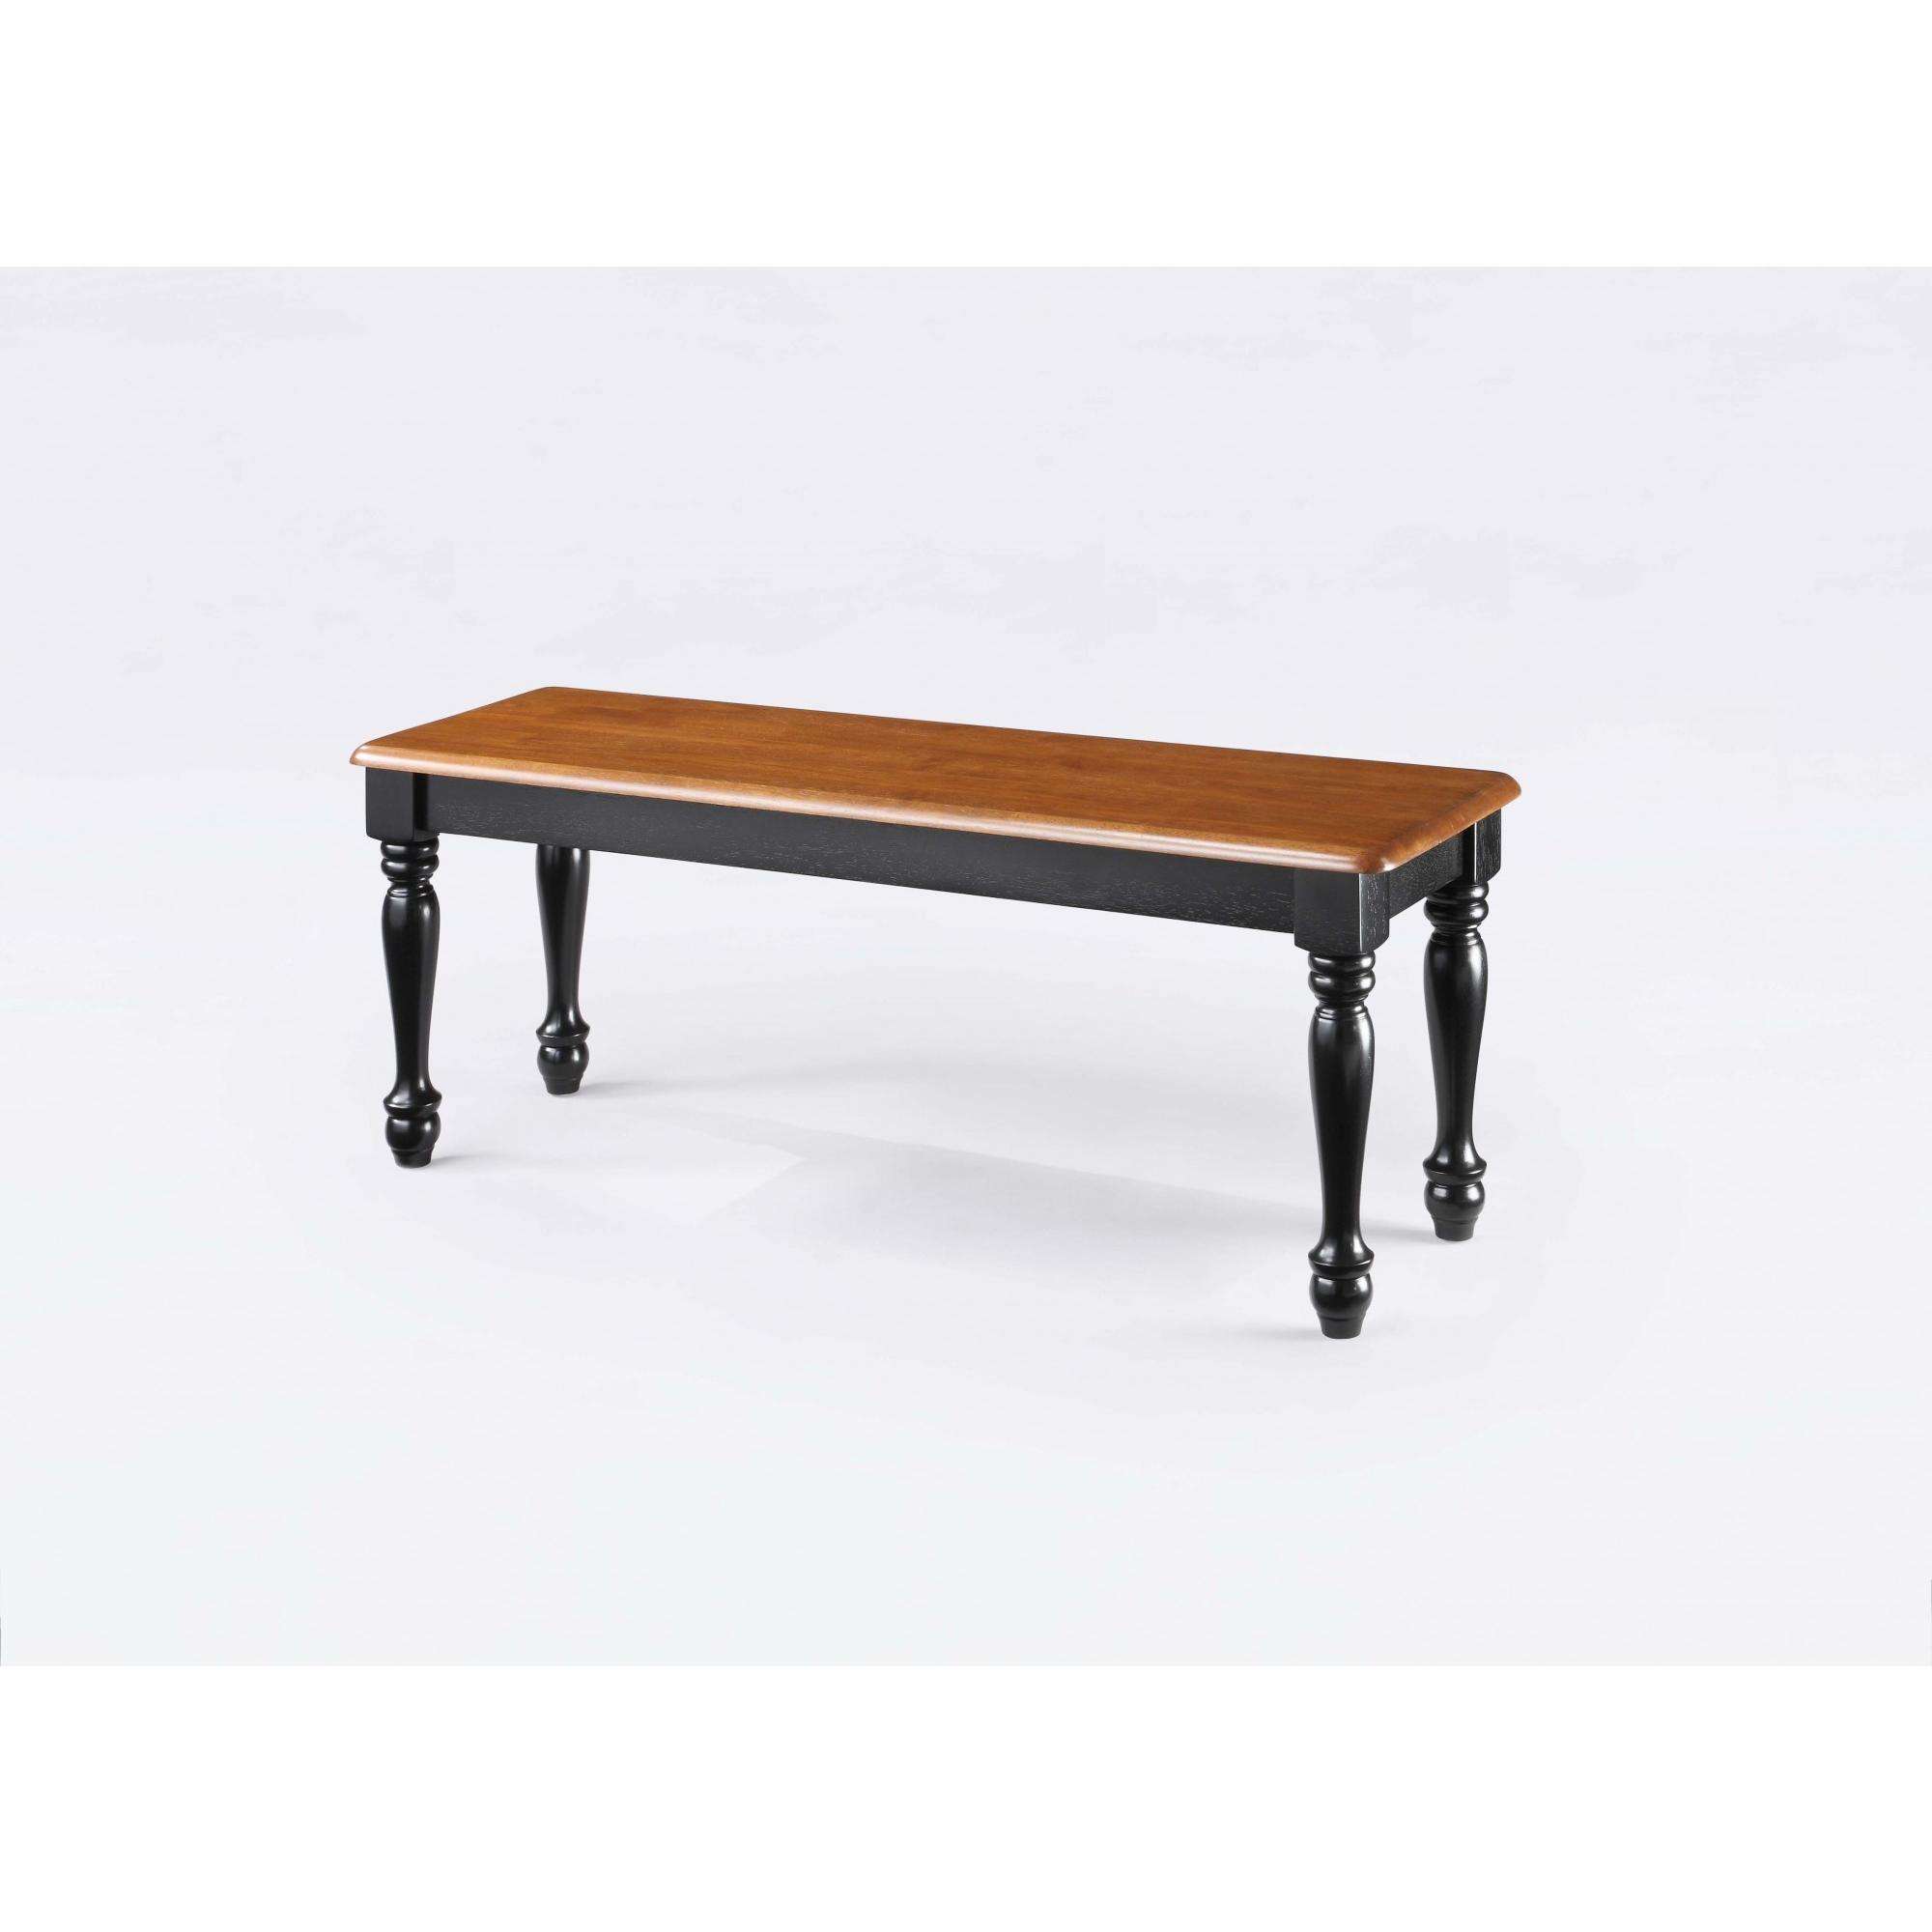 Better Homes & Gardens Autumn Lane Farmhouse Solid Wood Dining Bench, Black and Natural Finish - image 1 of 5